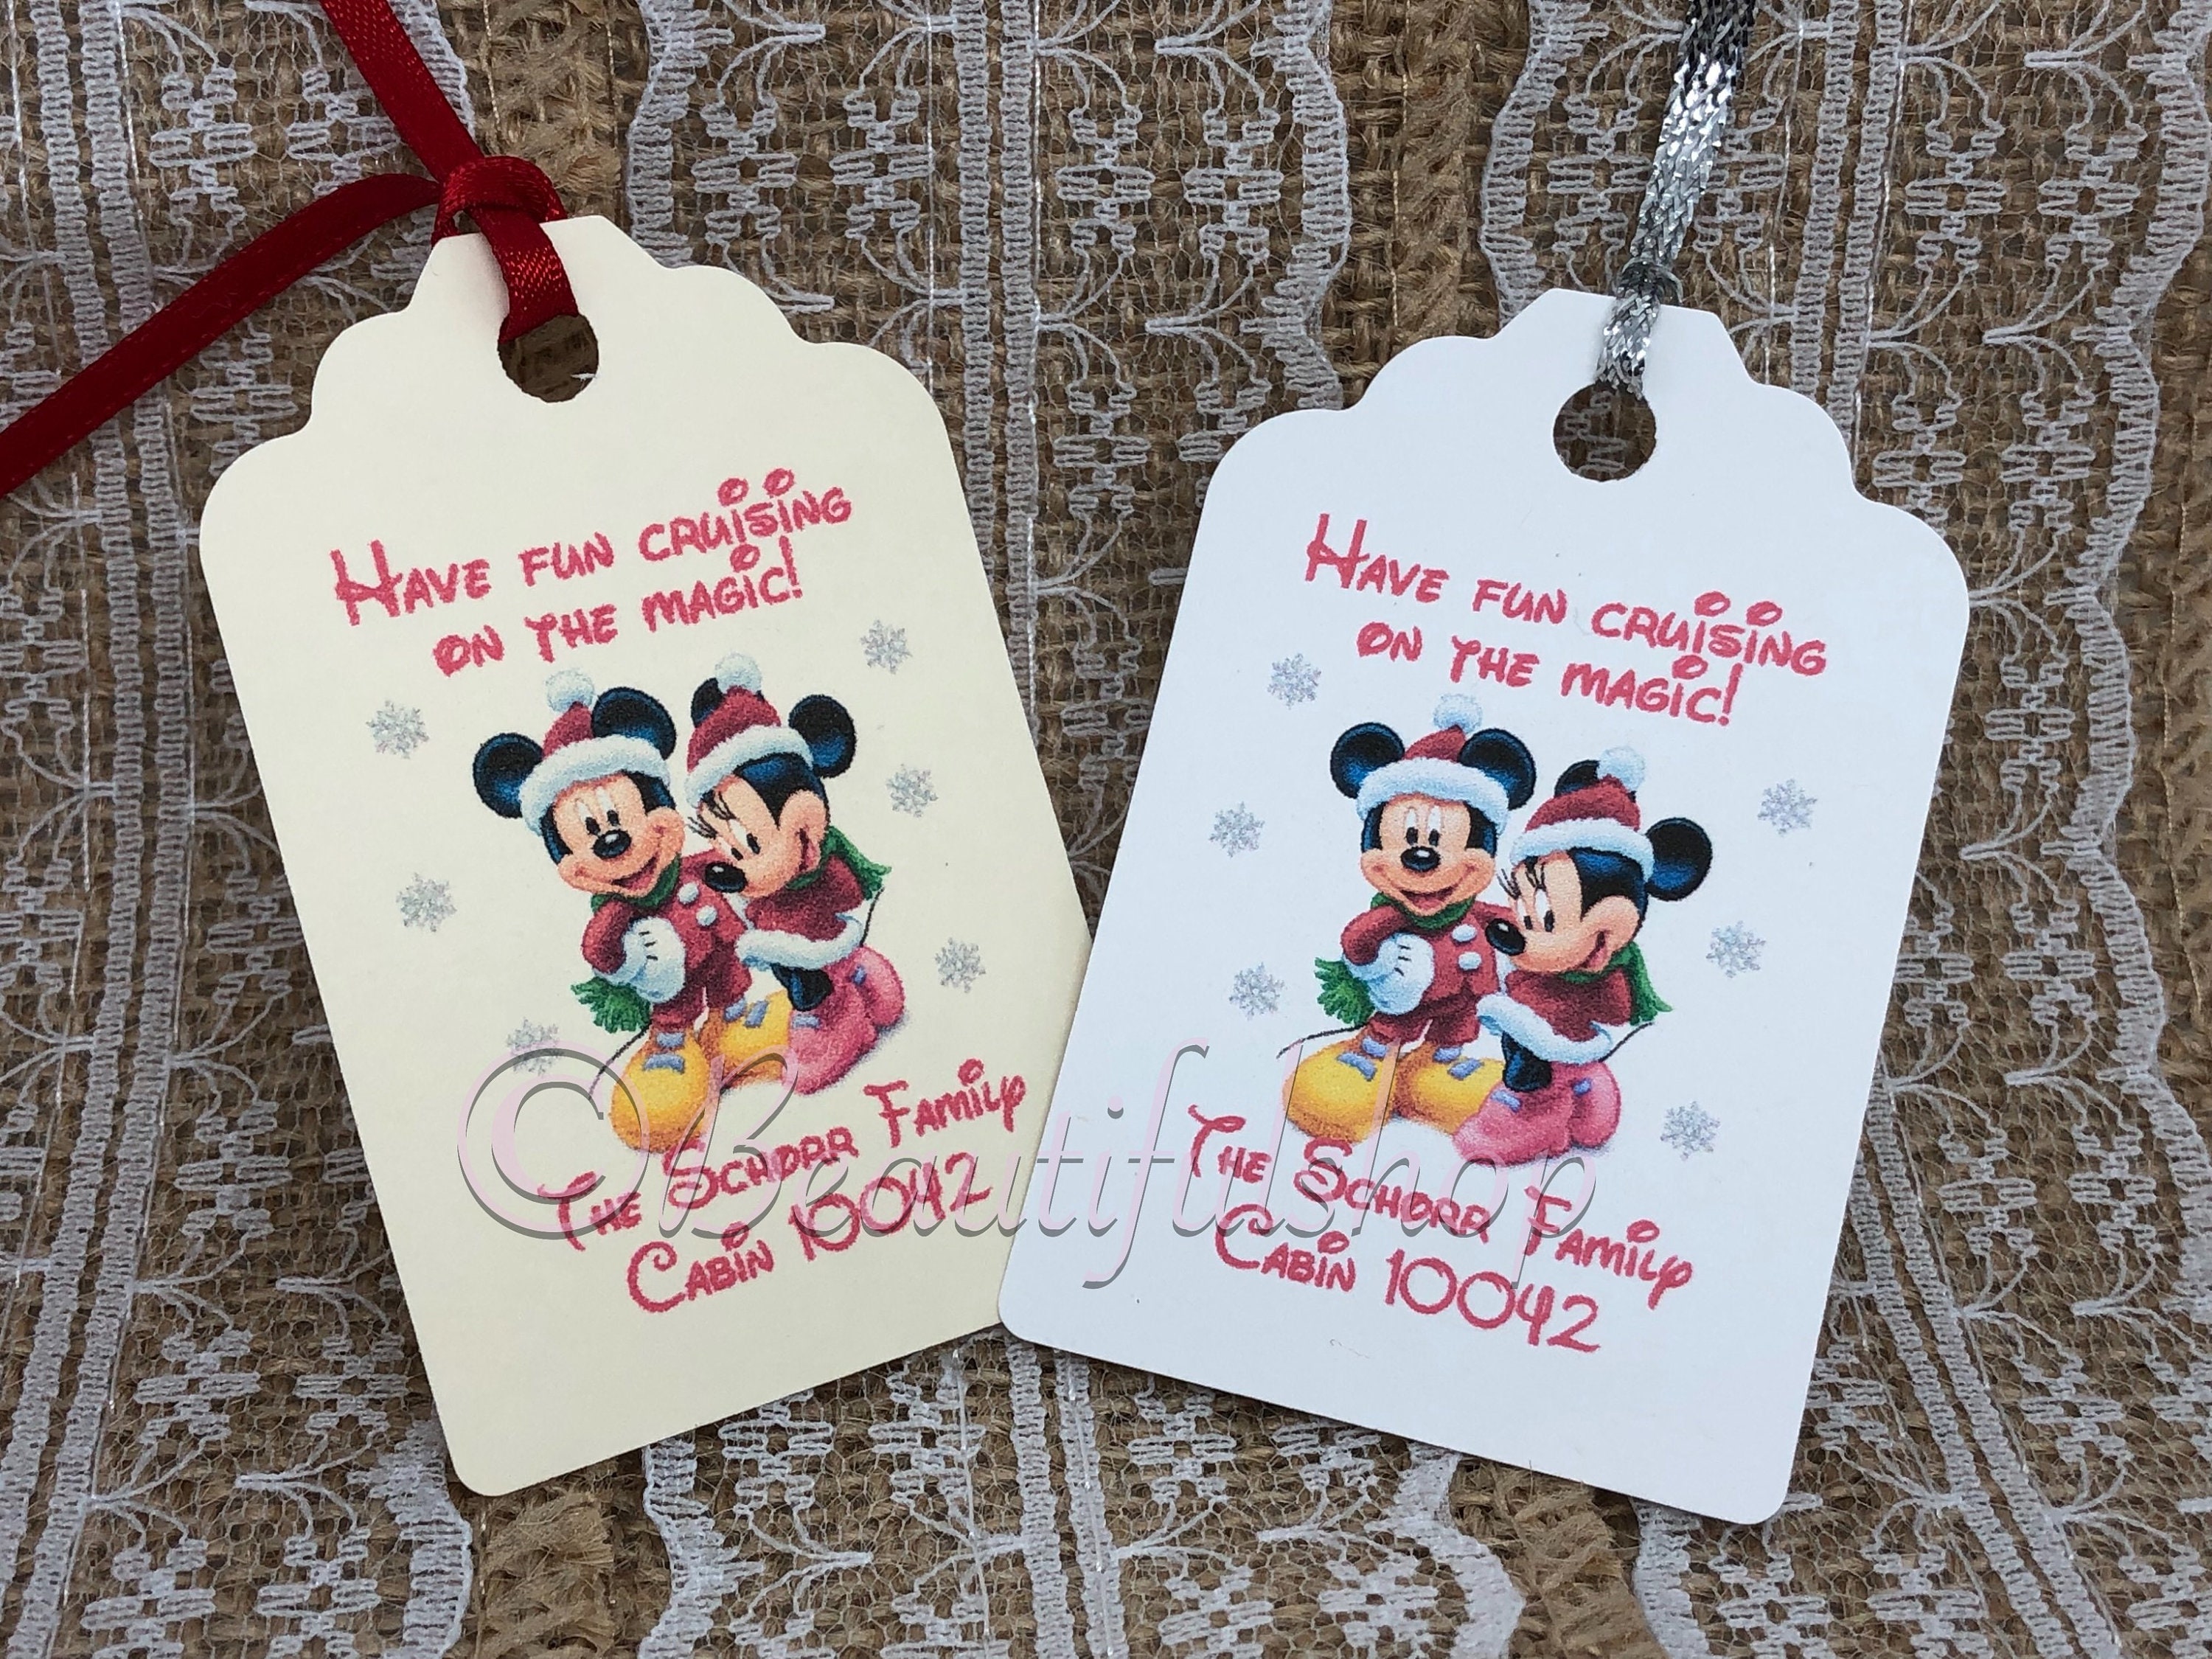 FE Tag, Fish Extender, Merrytime Themed Gift Tag, Disney Cruise